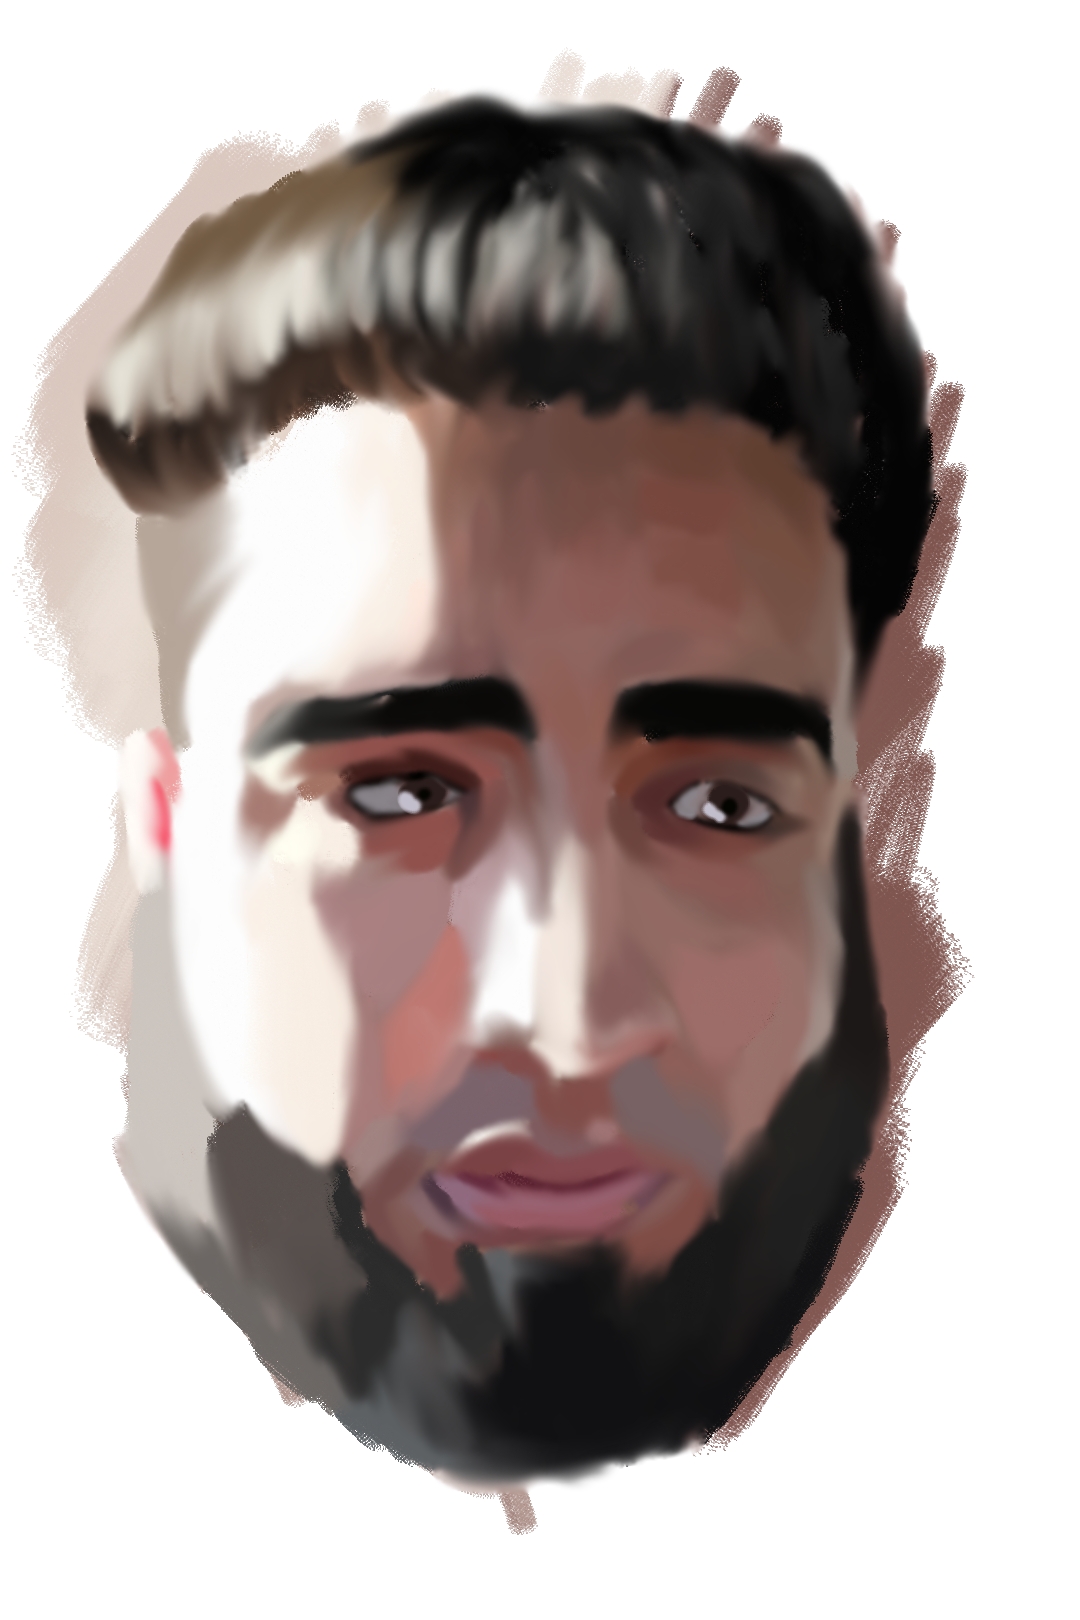 This is a self-portrait I did when I was experimenting with an oily digital brush. I really like how it came out - I was terrified of ruining all my careful color placement when I started using a blending brush.